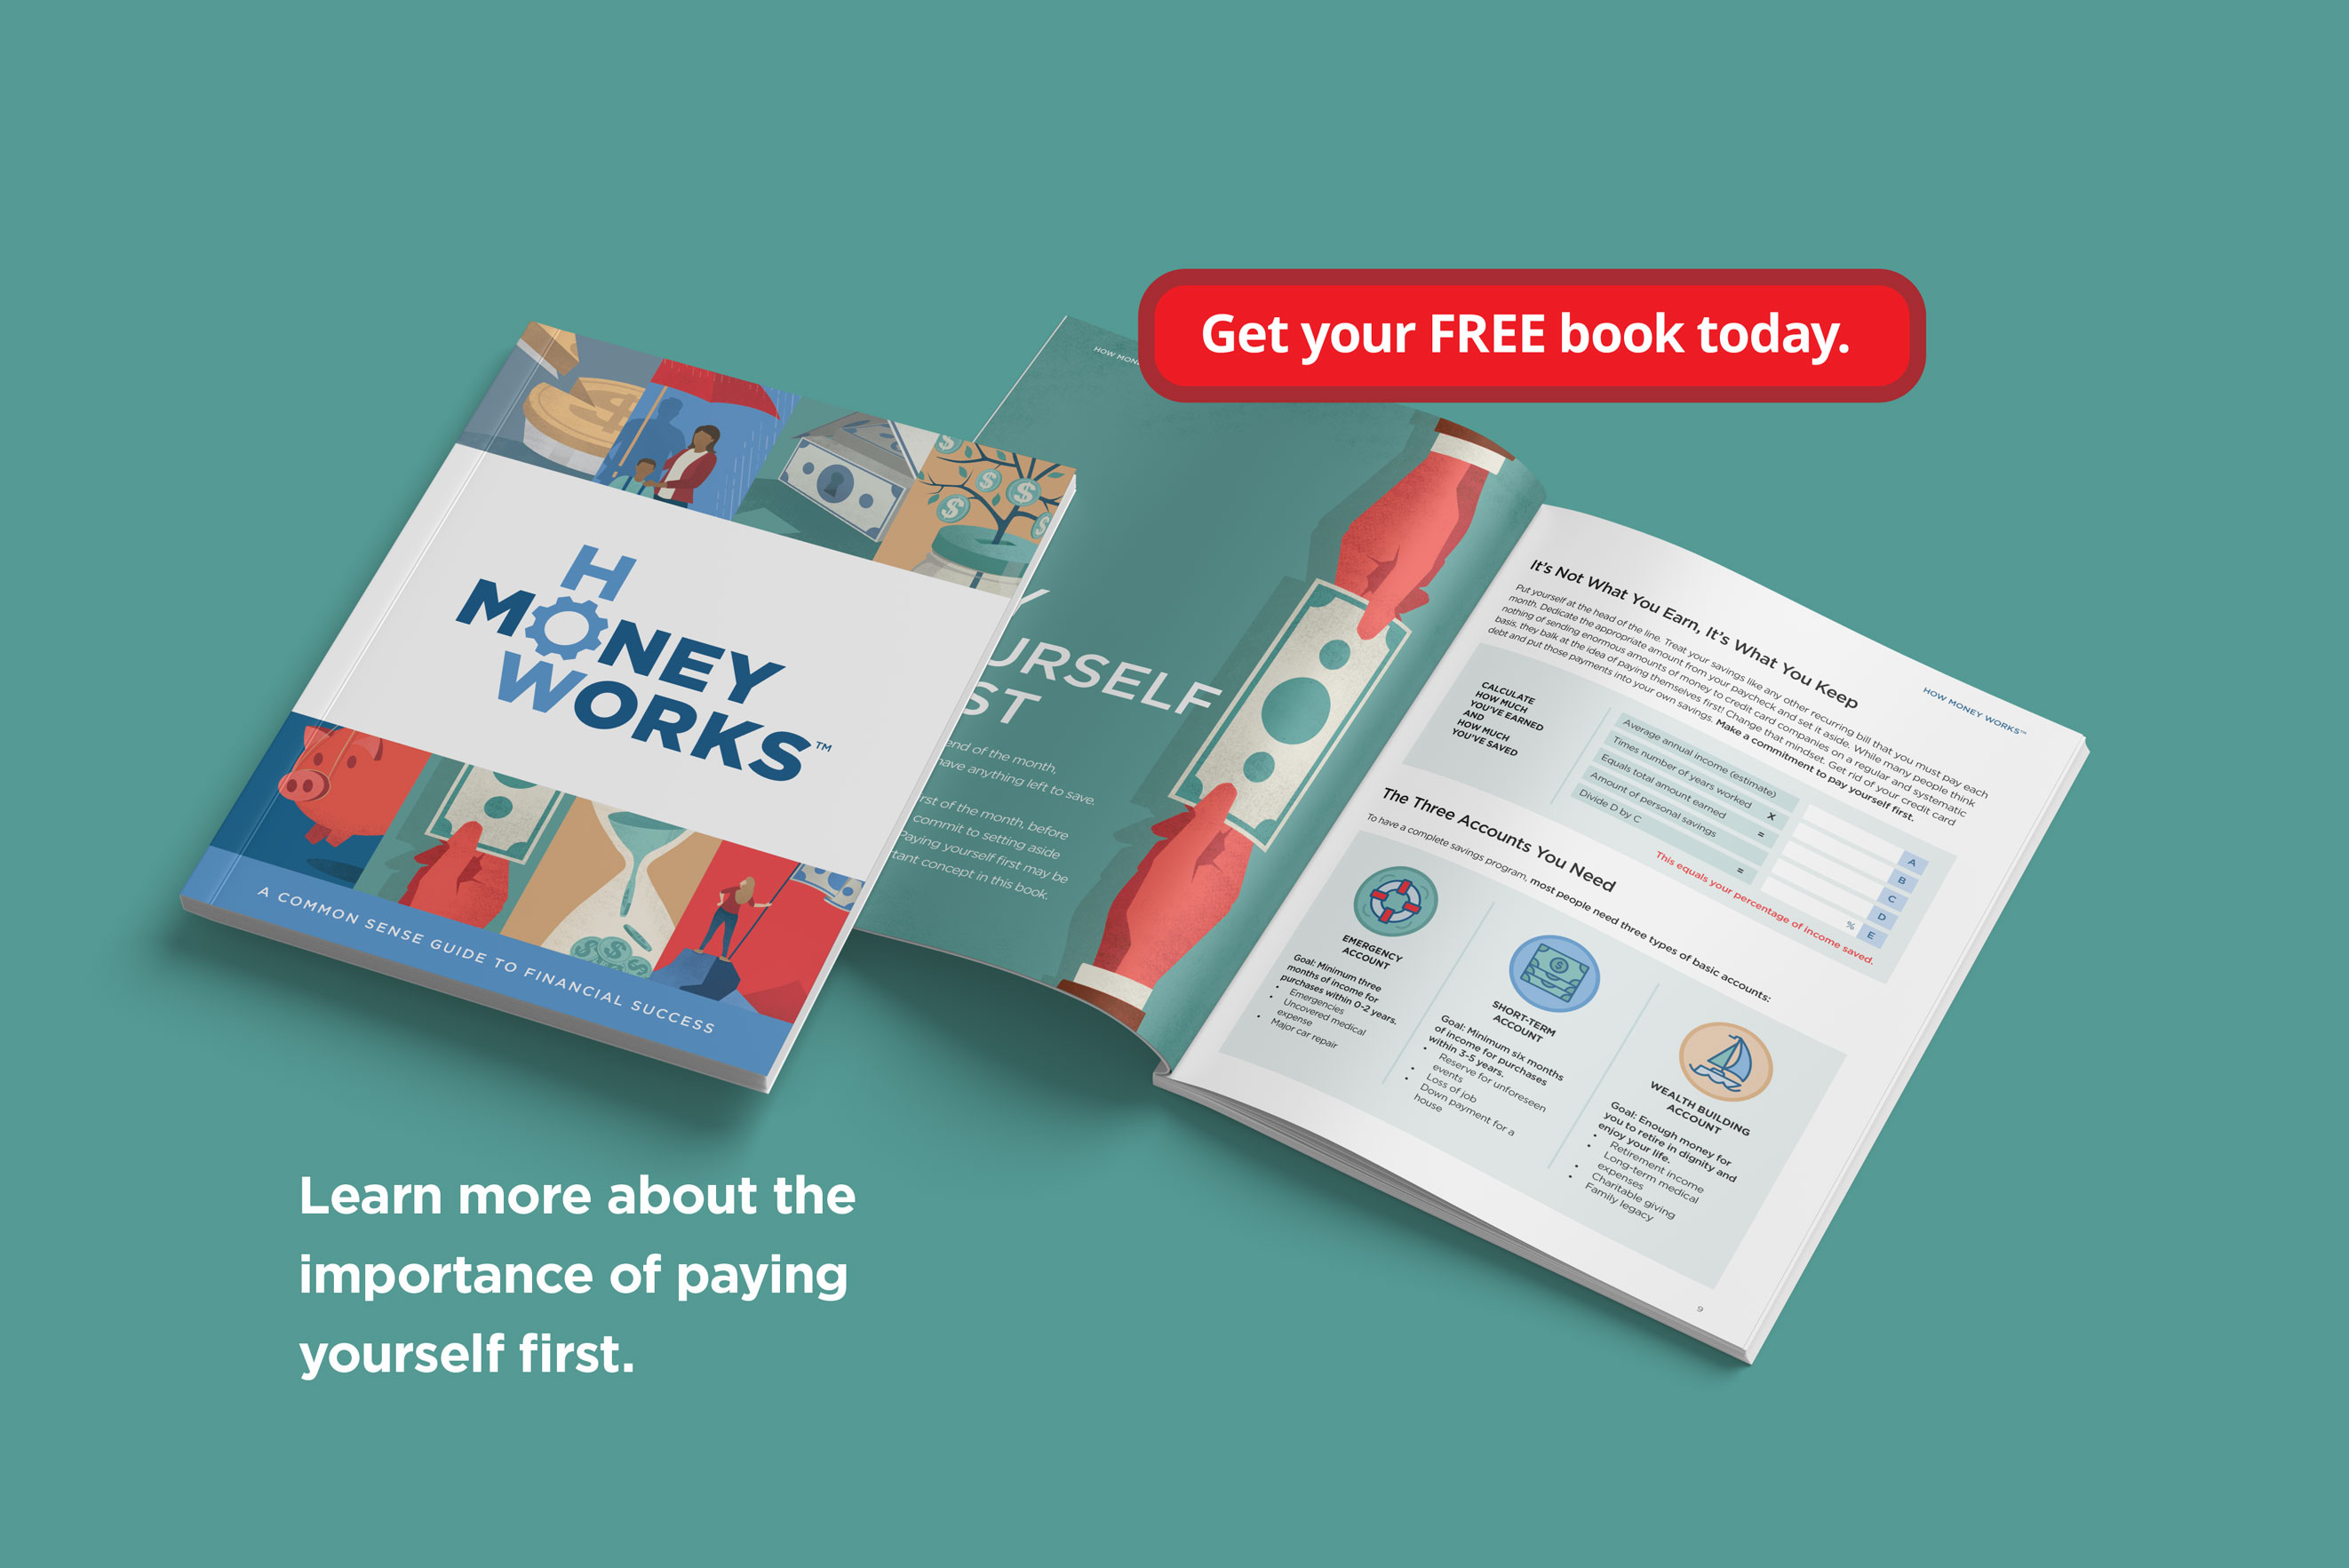 Learn more about the importance of paying yourself first. Get Your FREE copy today!